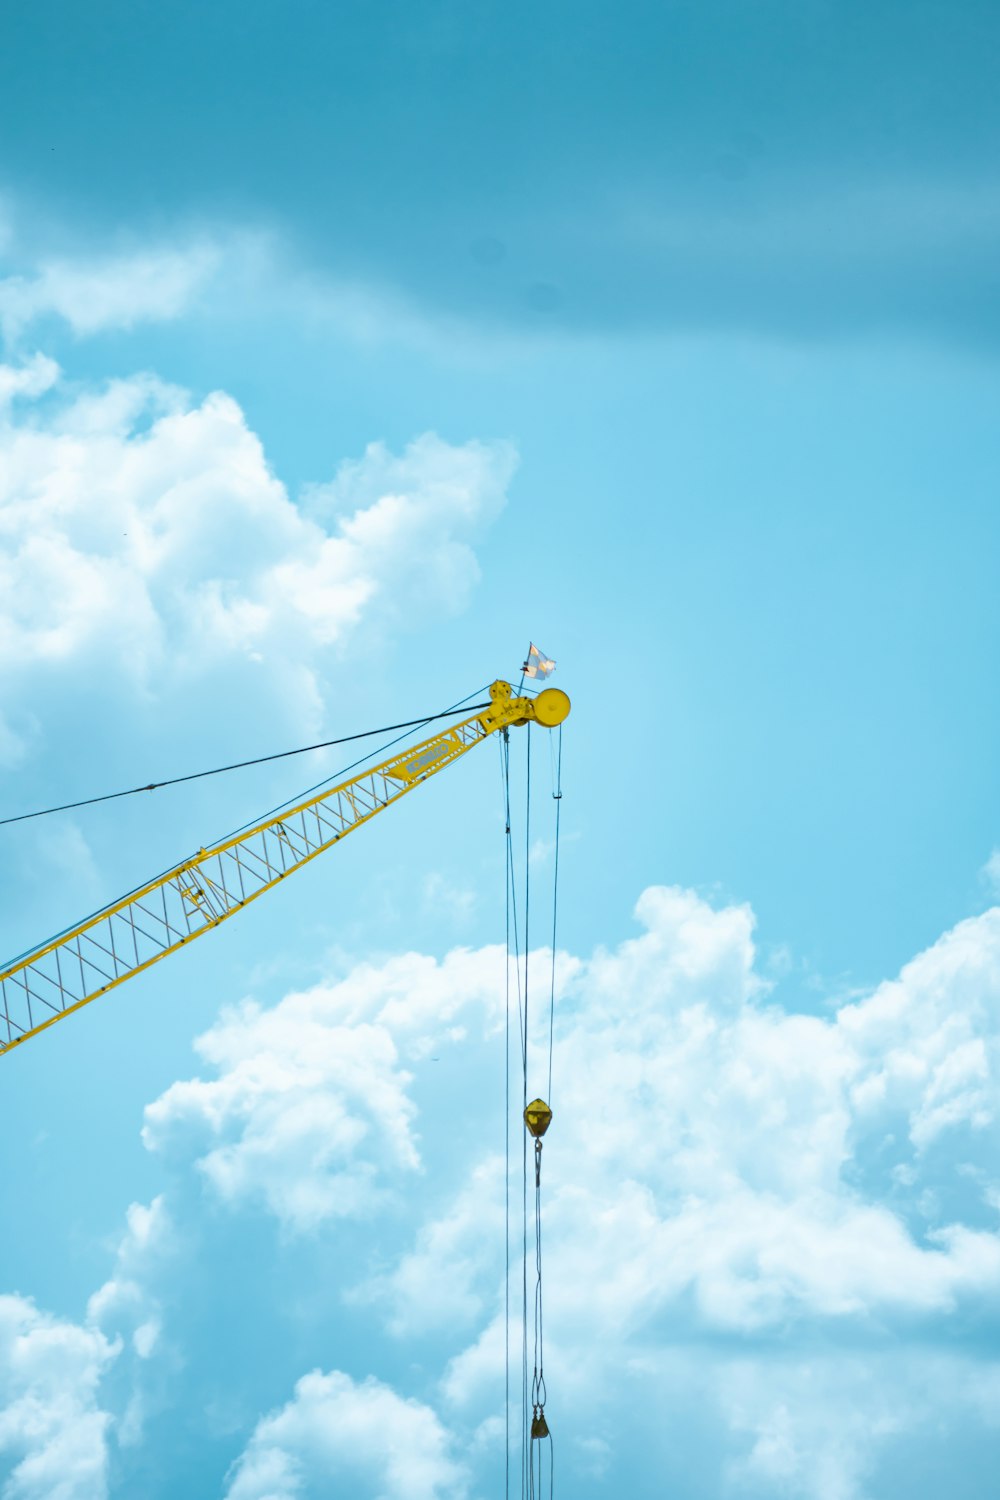 a yellow crane is suspended on a wire